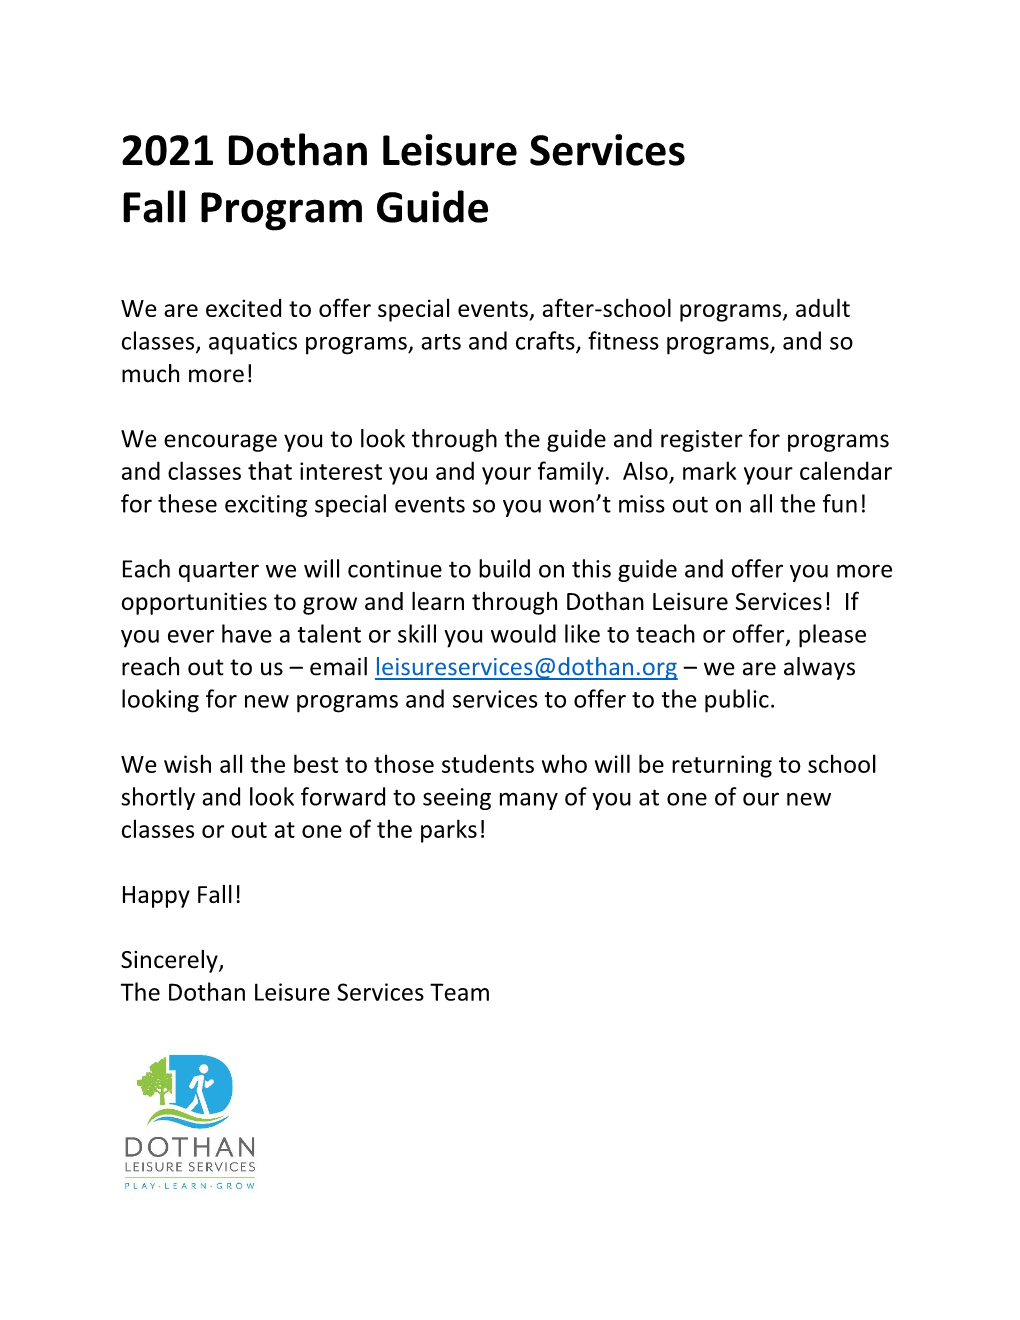 2021 Dothan Leisure Services Fall Program Guide